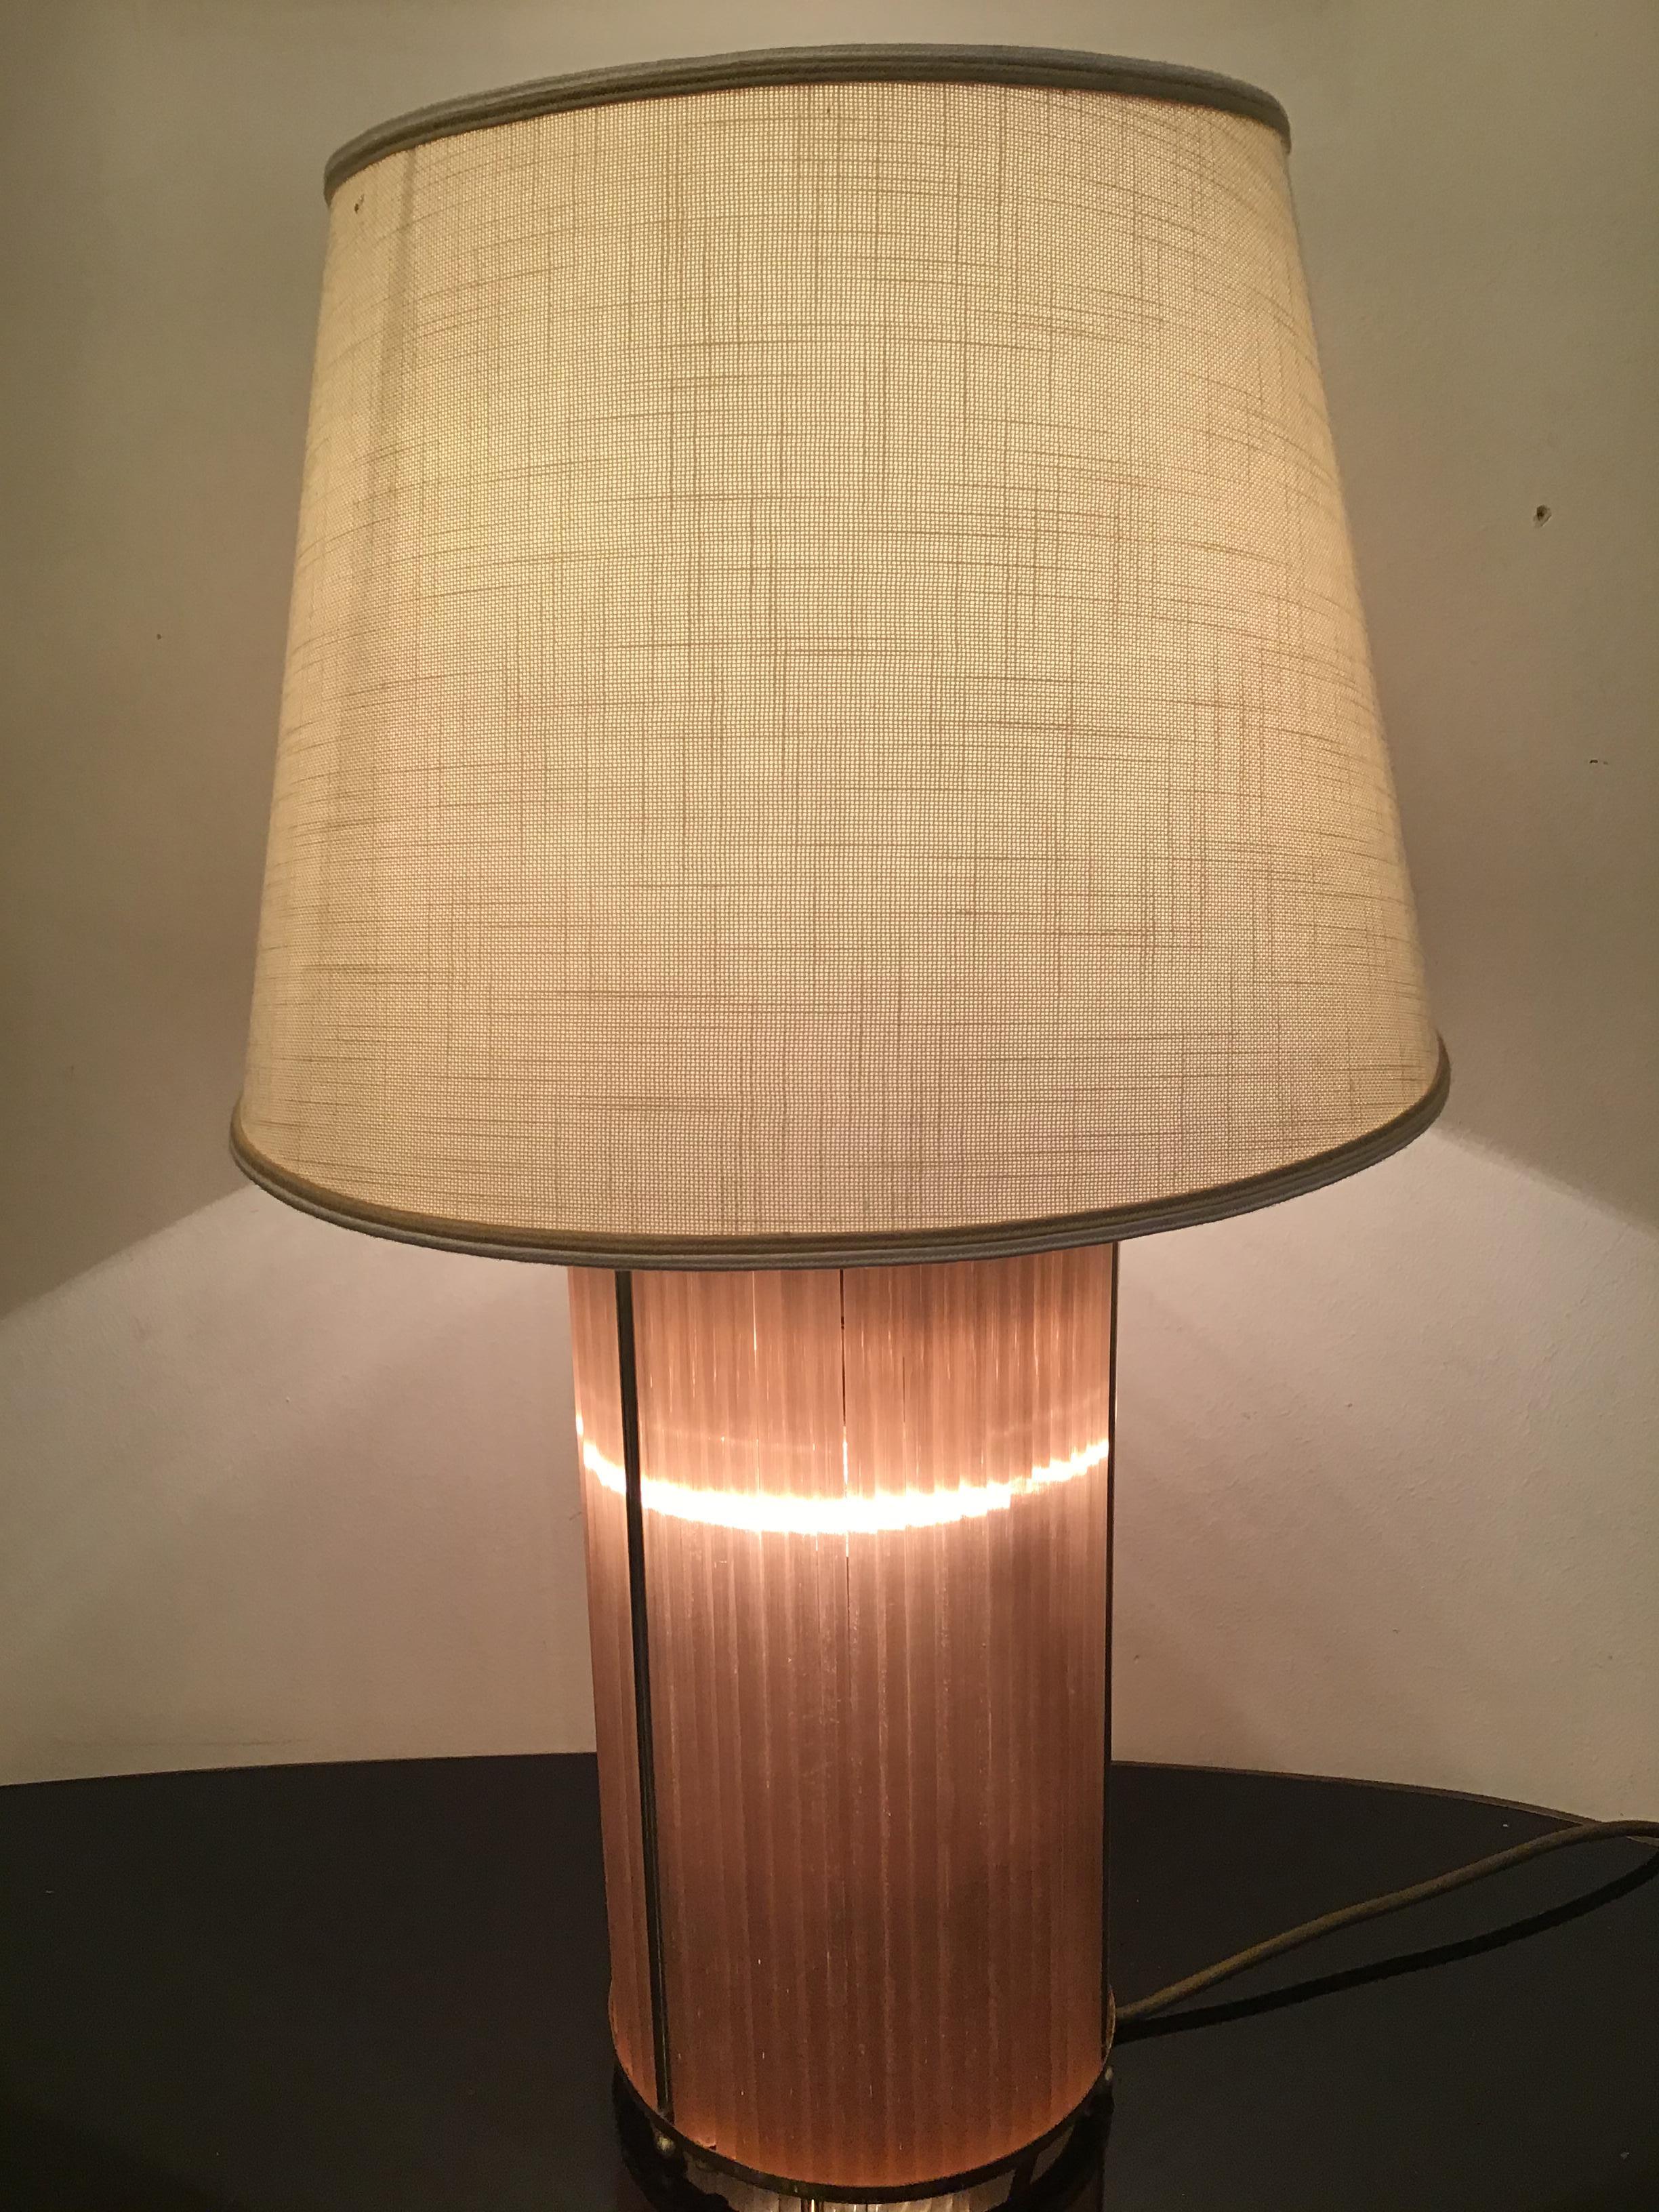 Mid-20th Century Venini Table Lamp Brass Murano Glass Fabric Lampshade 1960 Italy For Sale